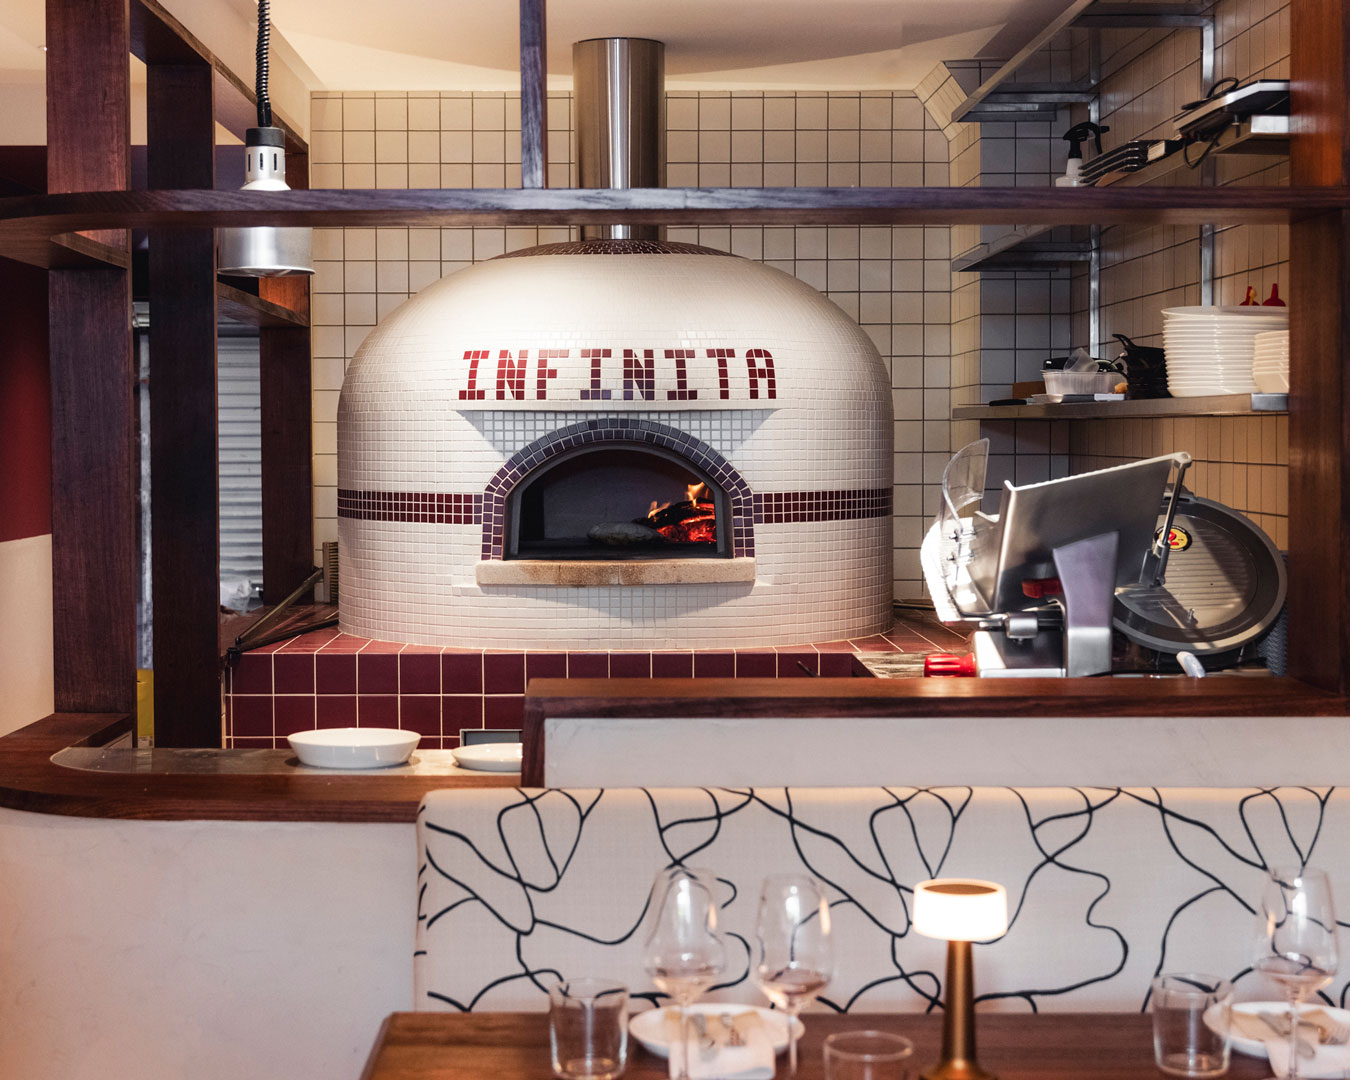 The pizza oven at Bar Infinita, a new restaurant in Sydney